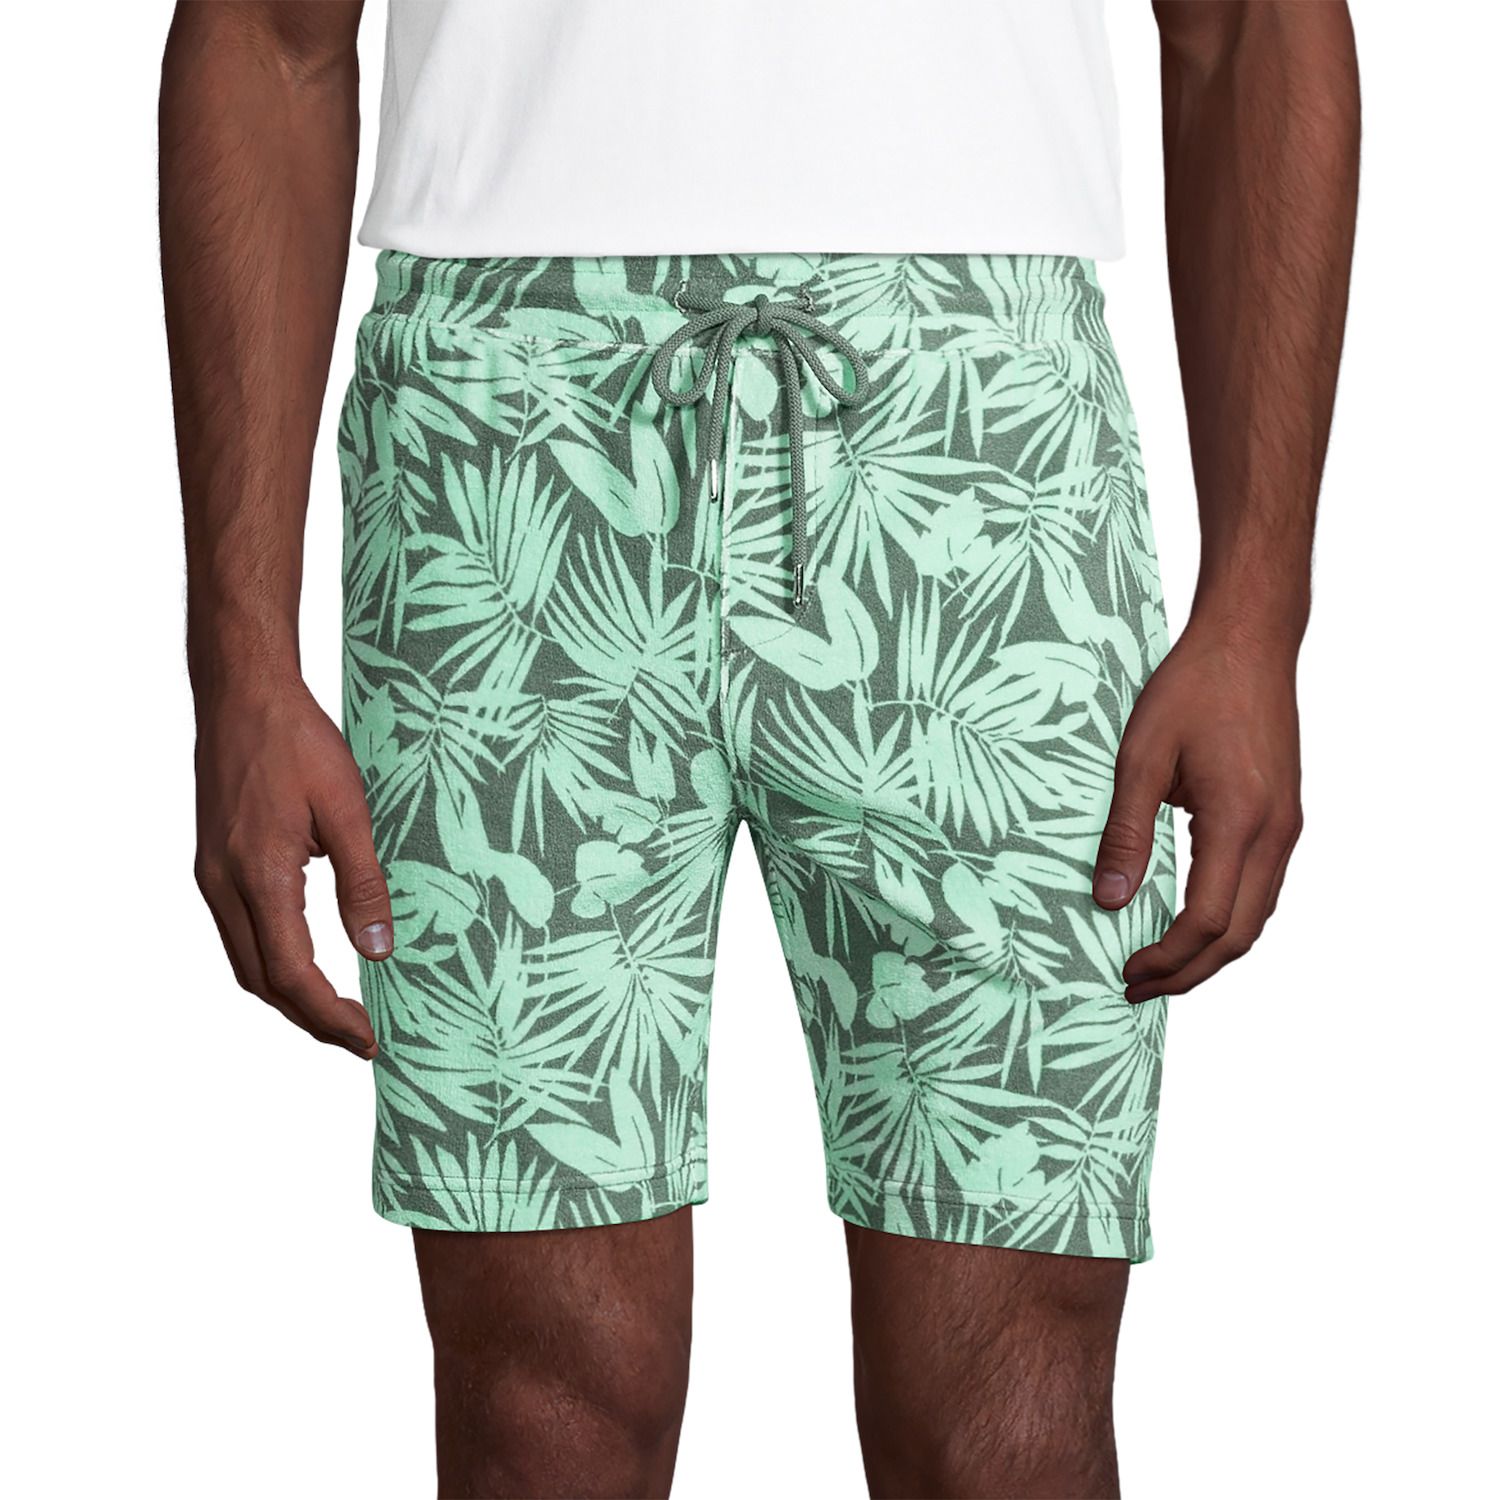 Image for Lands' End Men's Terry Cloth Shorts at Kohl's.